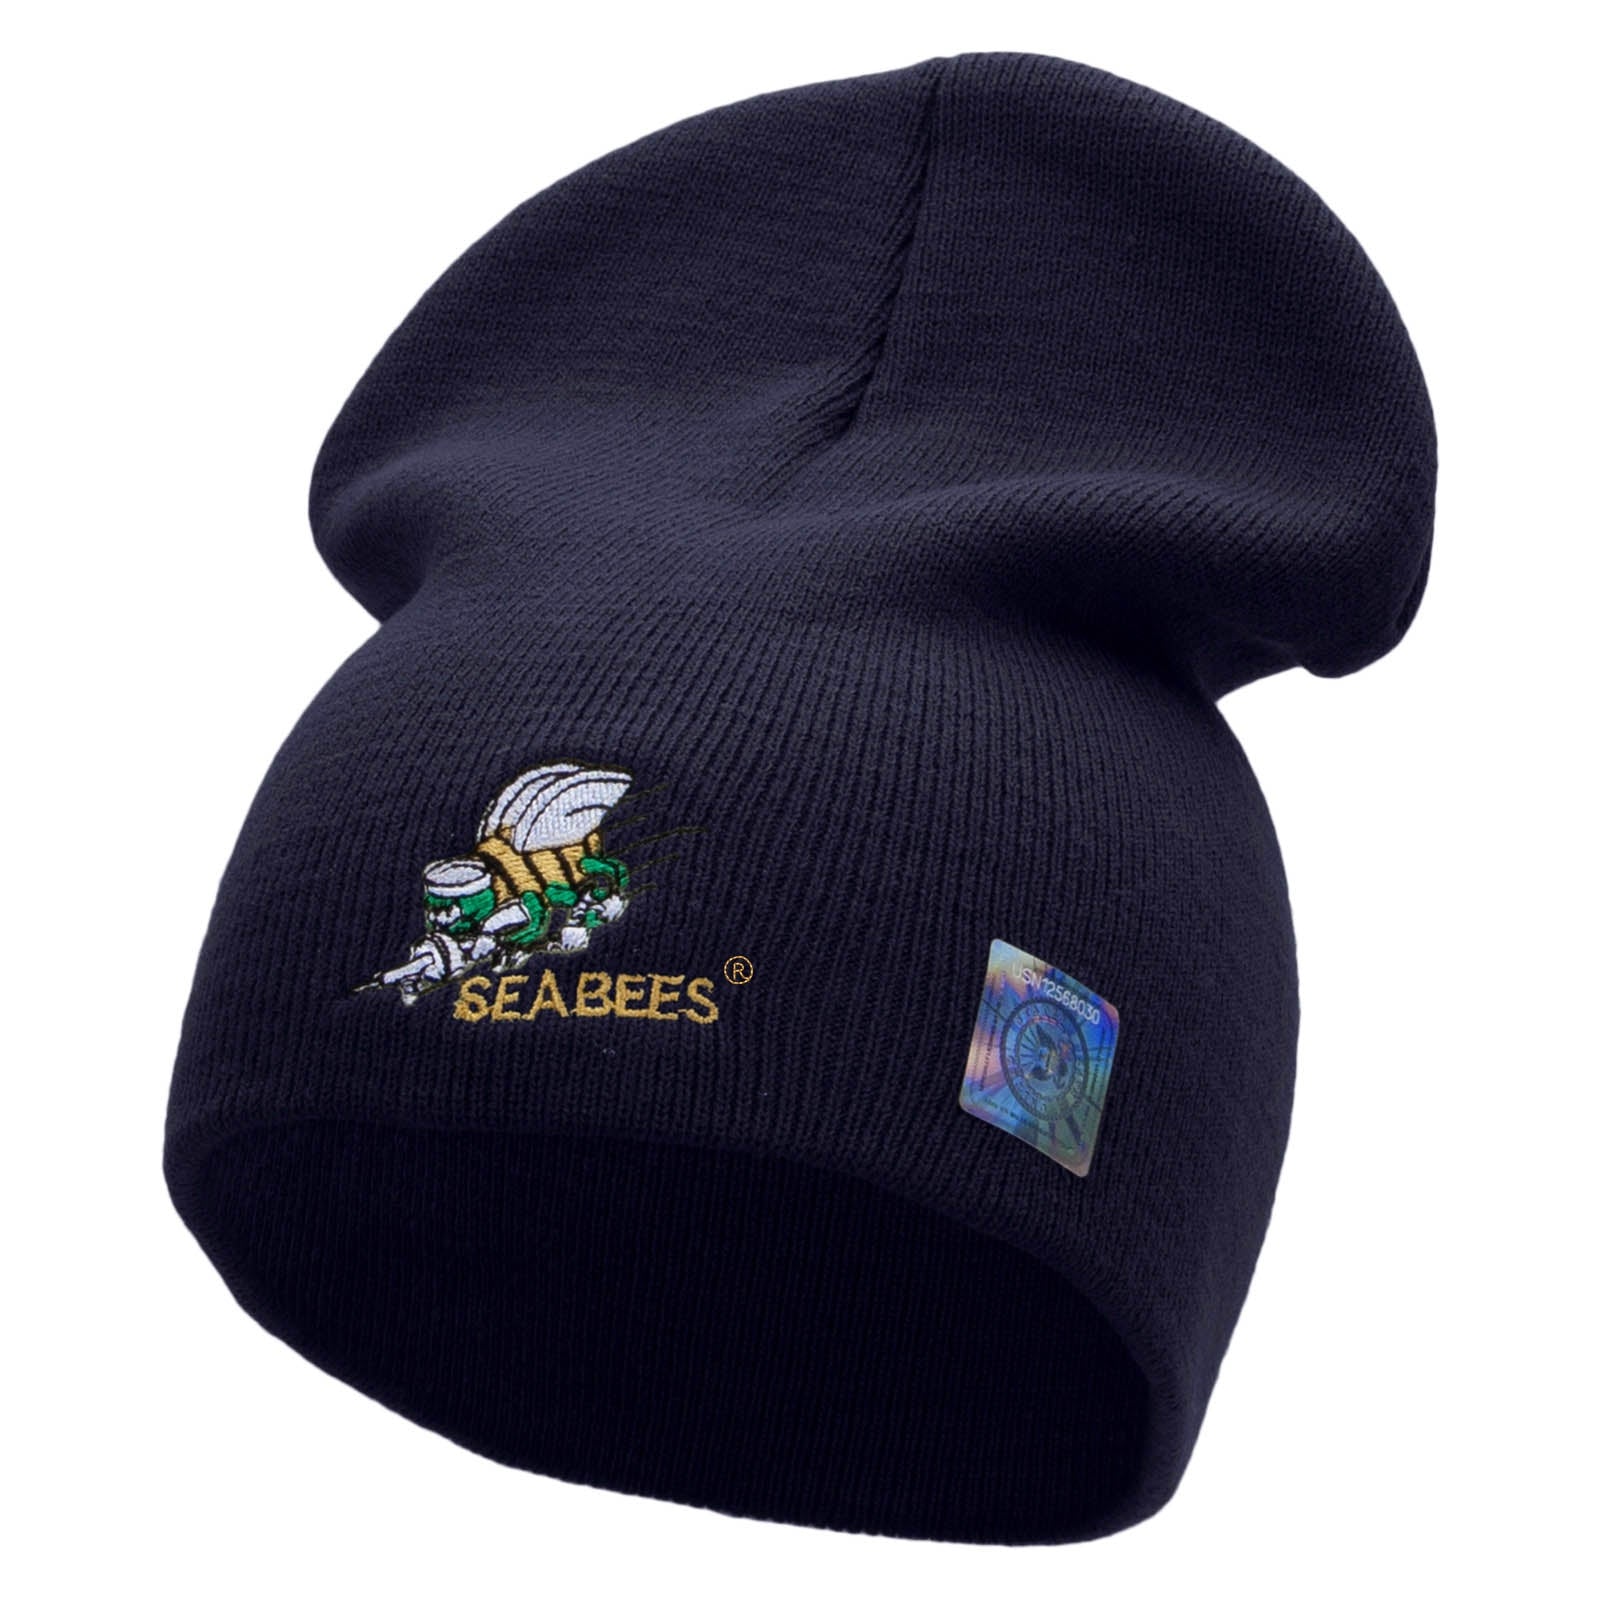 Licensed Navy Seabees Symbol Embroidered Short Beanie Made in USA - Navy OSFM